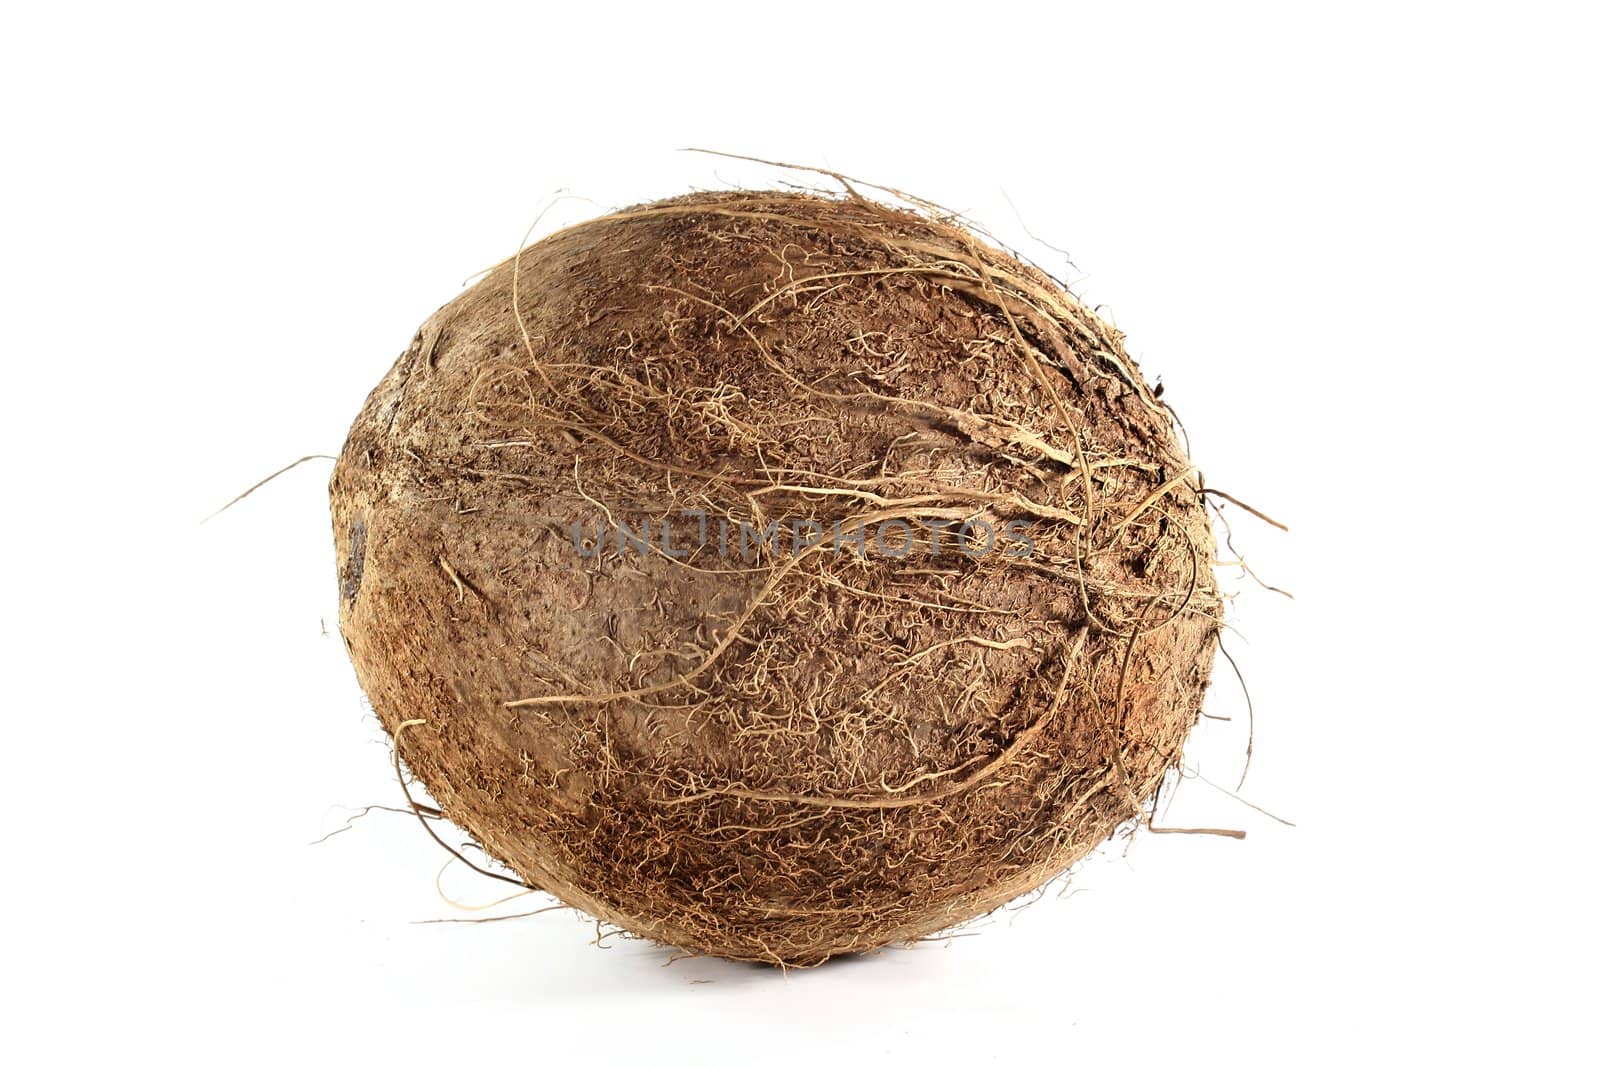 a fresh coconut in front of white background